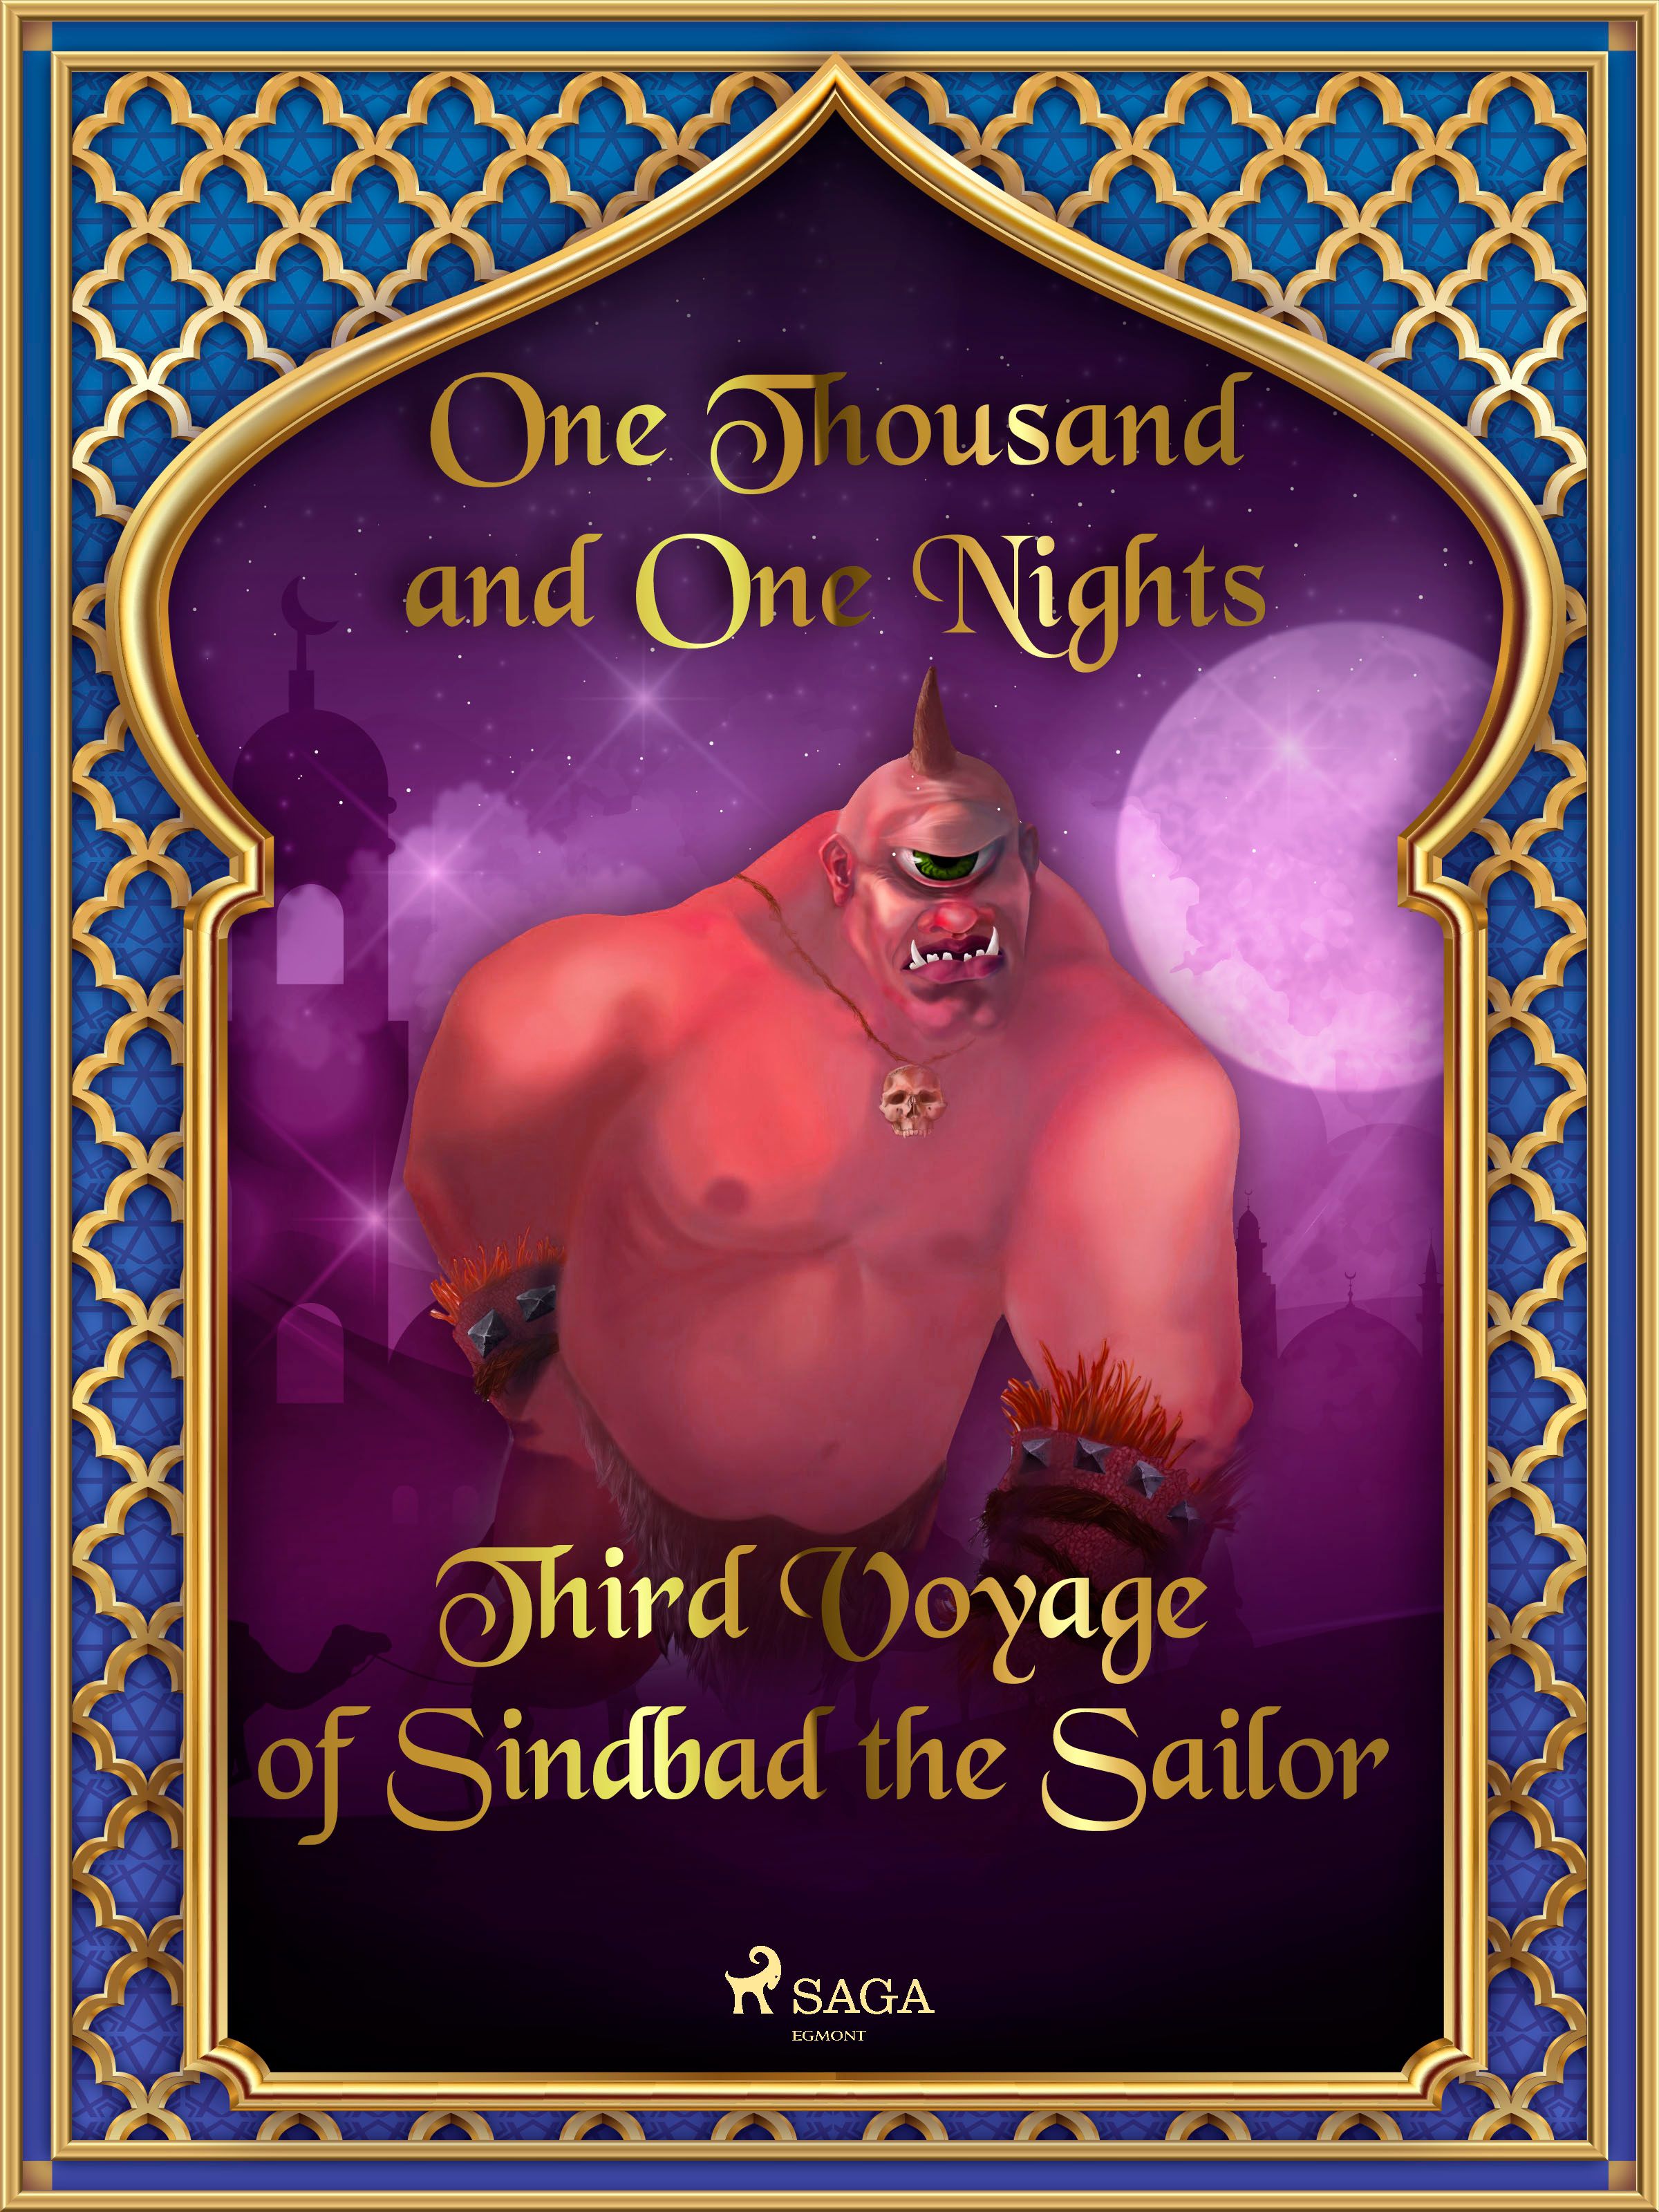 Third Voyage of Sindbad the Sailor, eBook by One Thousand and One Nights